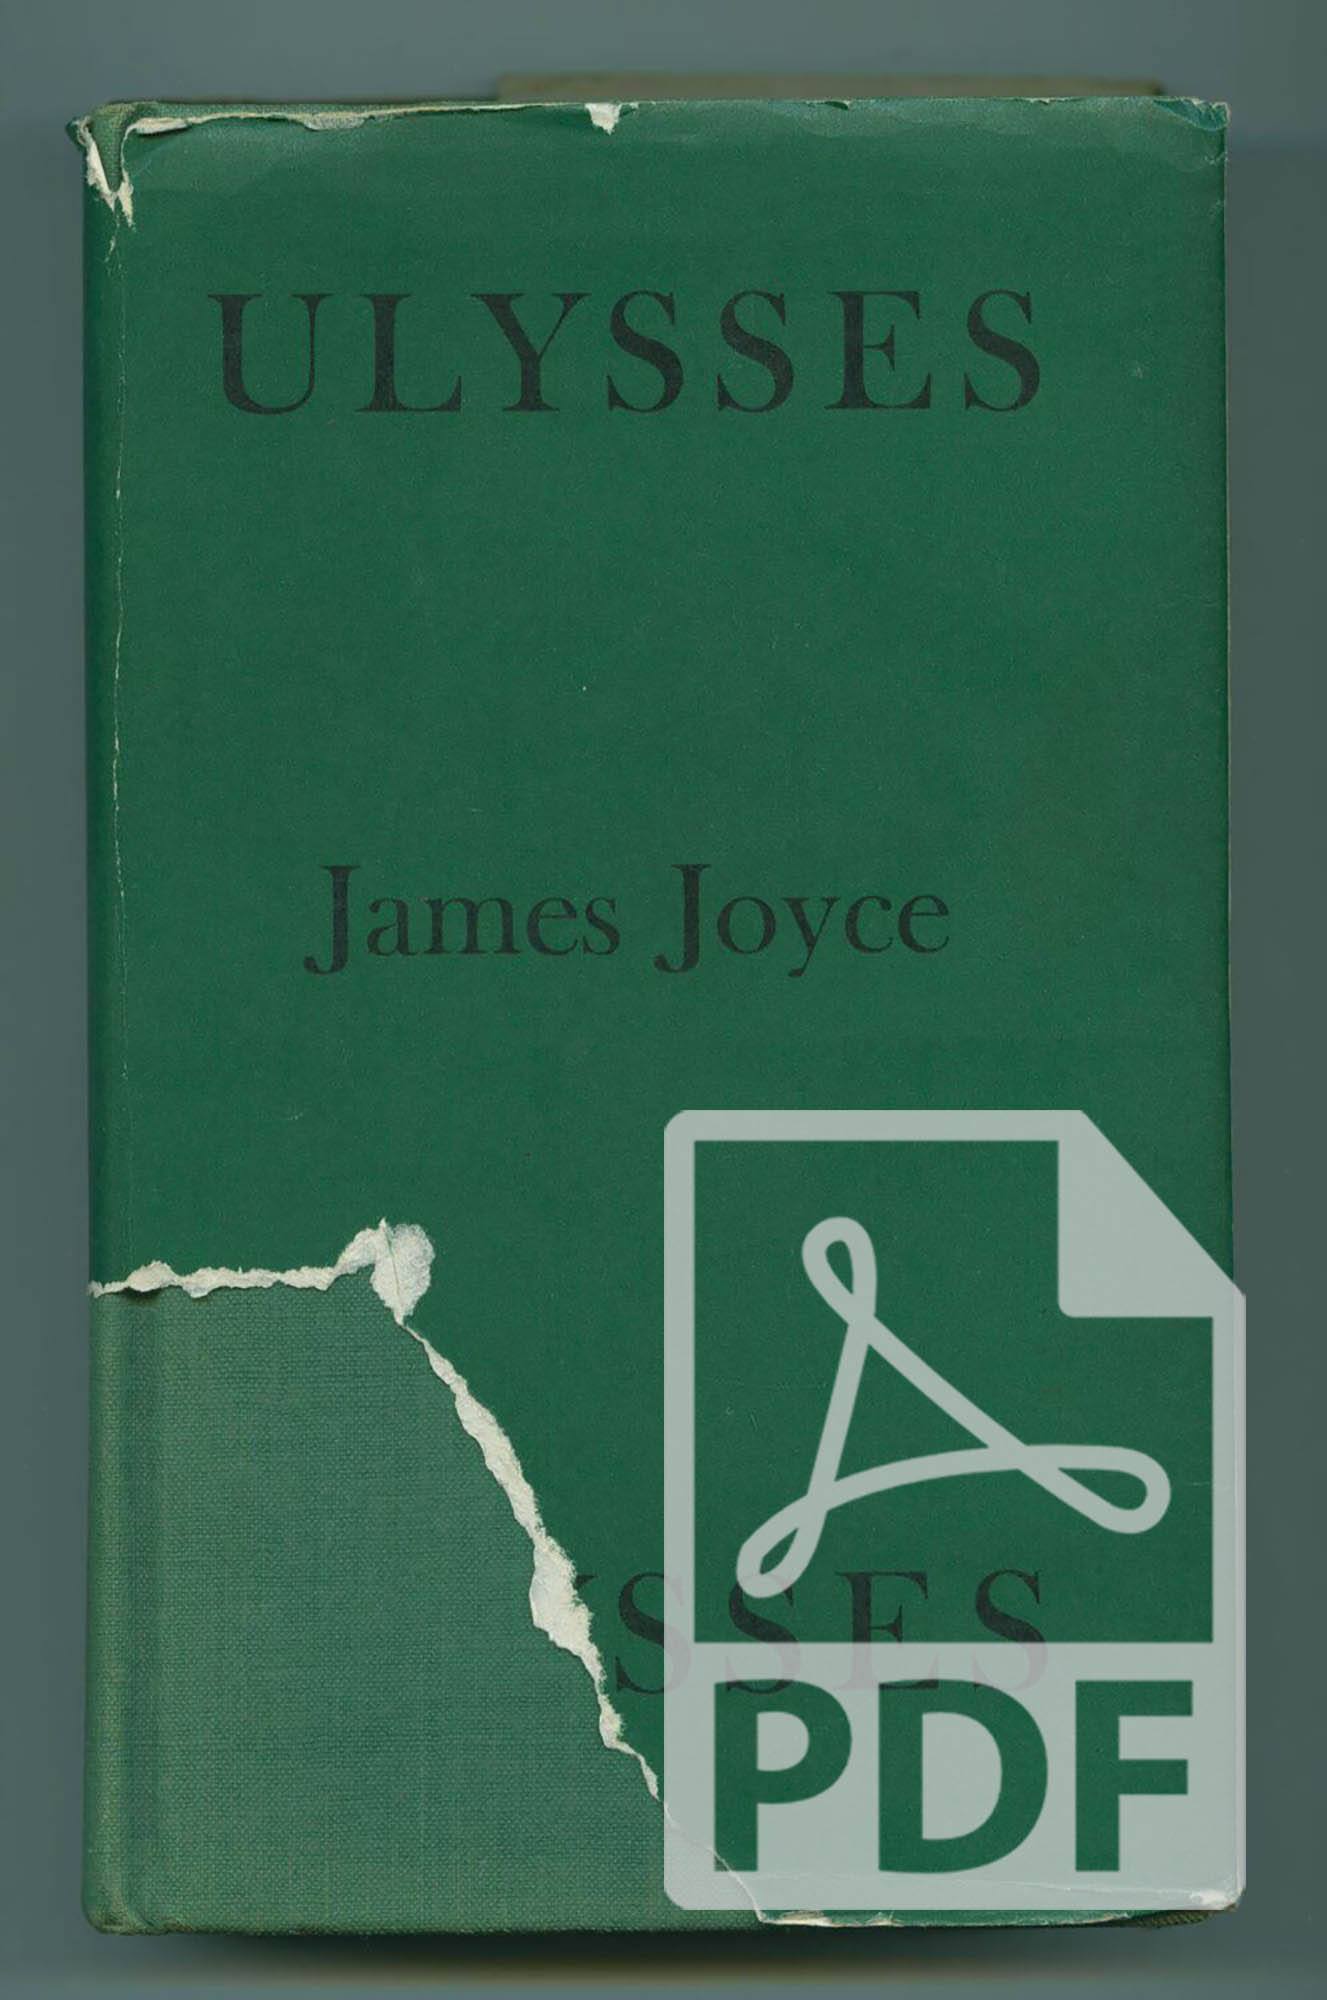 A Ulysses book with a PDF logo